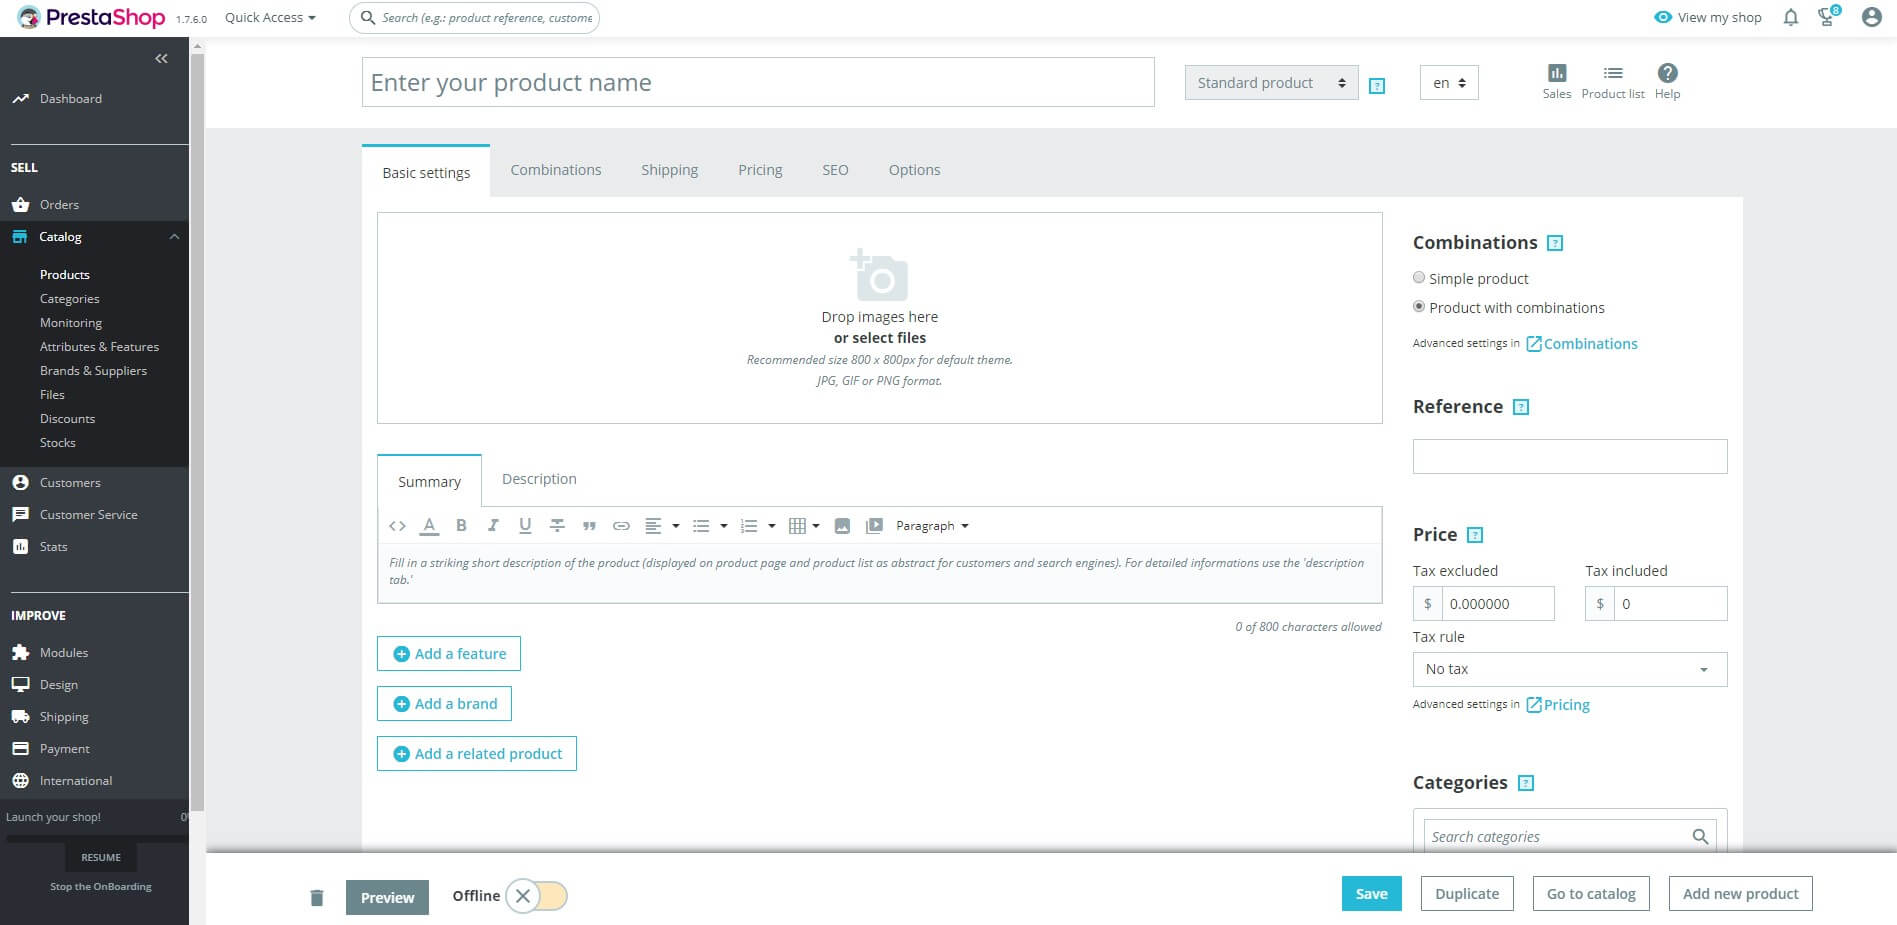 Adding new product with combinations PrestaShop 1.7